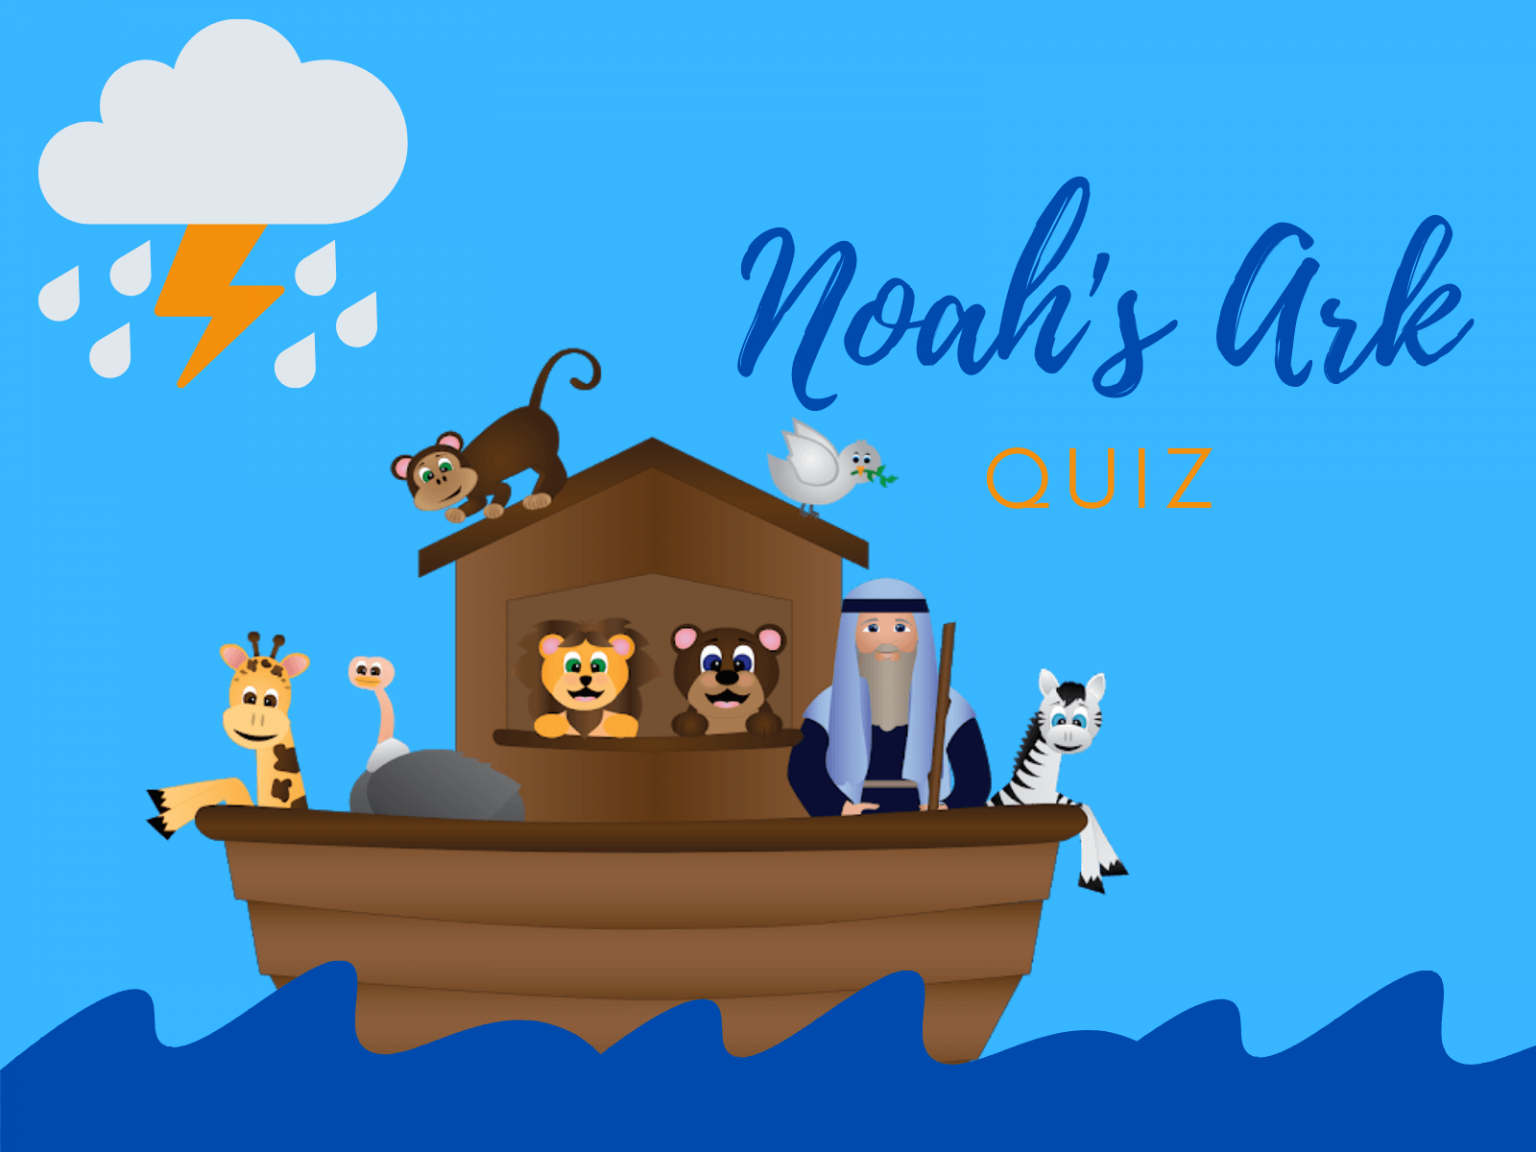 QUIZ Even Sunday School kids can answer these Noah’s Ark questions